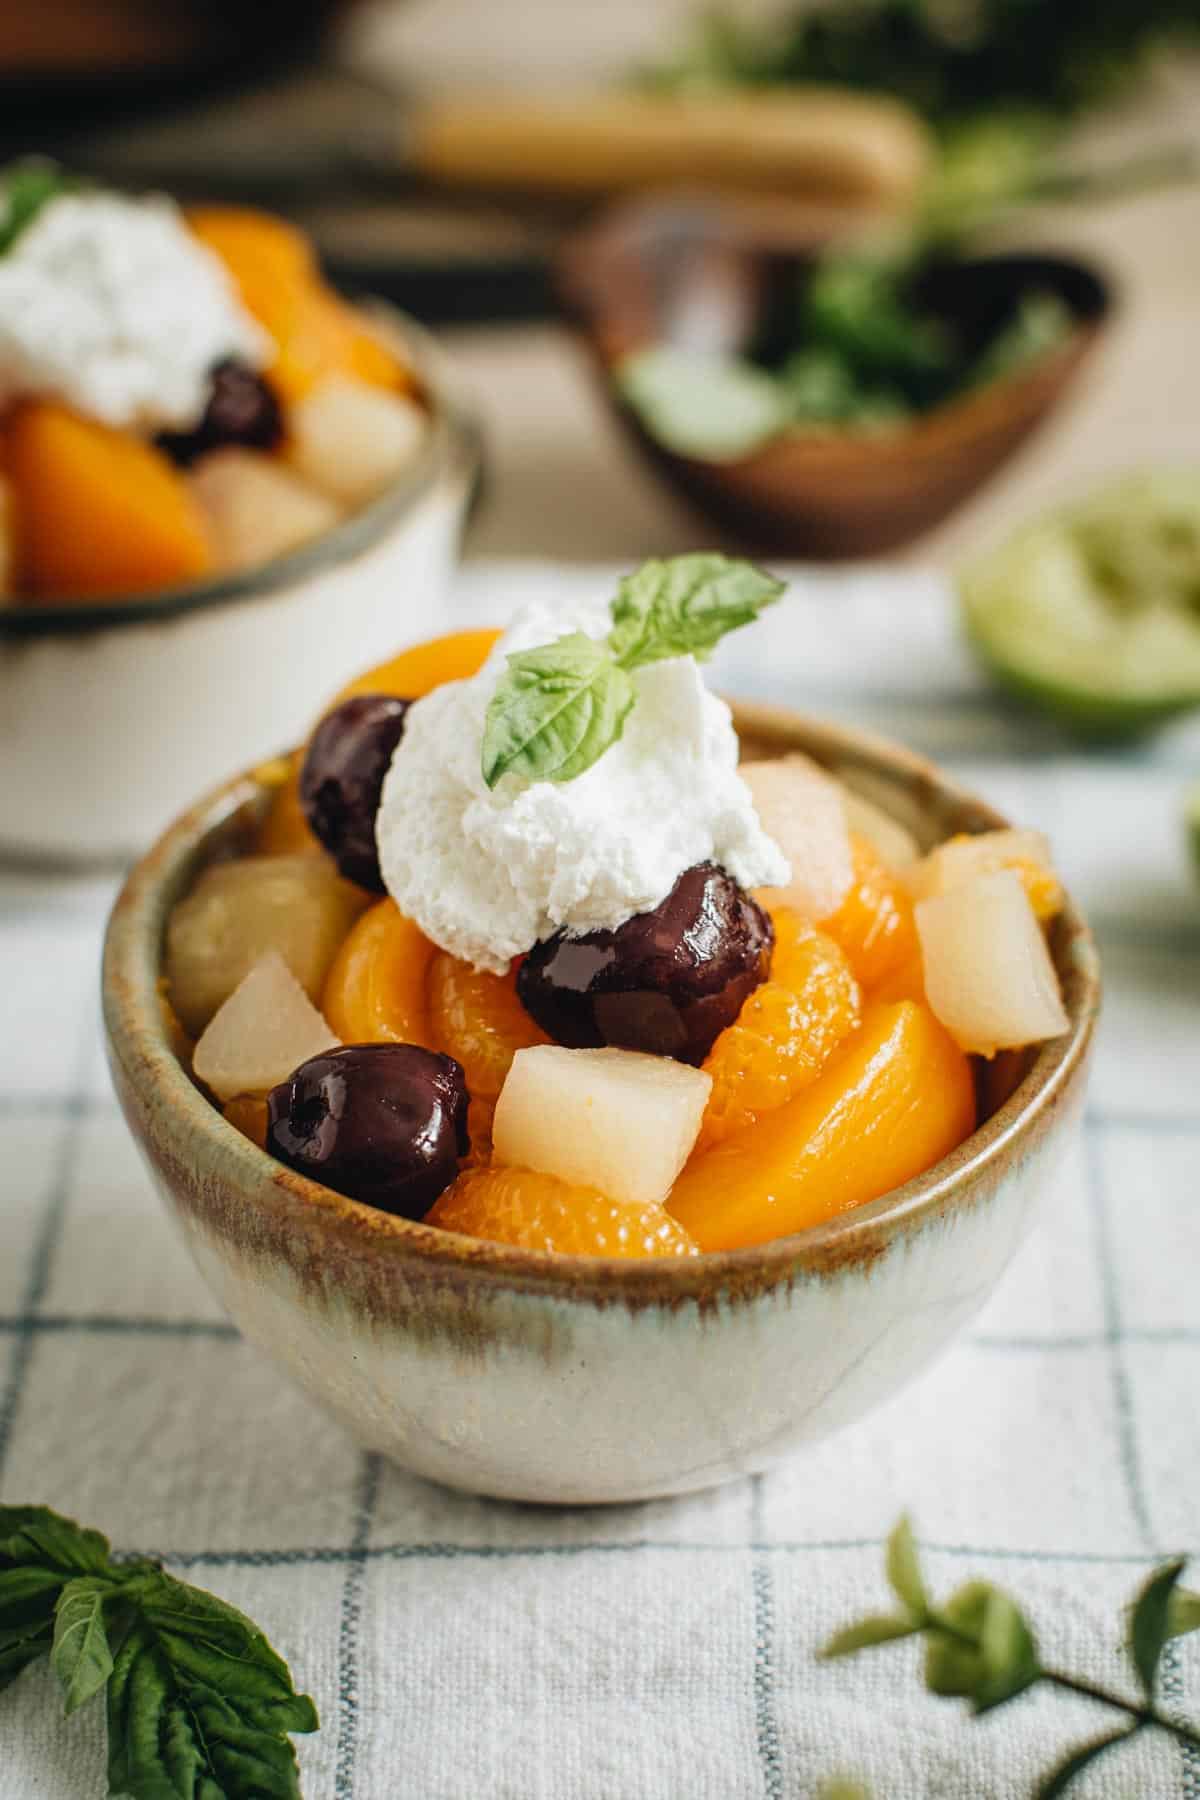 Fruit cocktail salad topped with whipped cream and fresh basil.